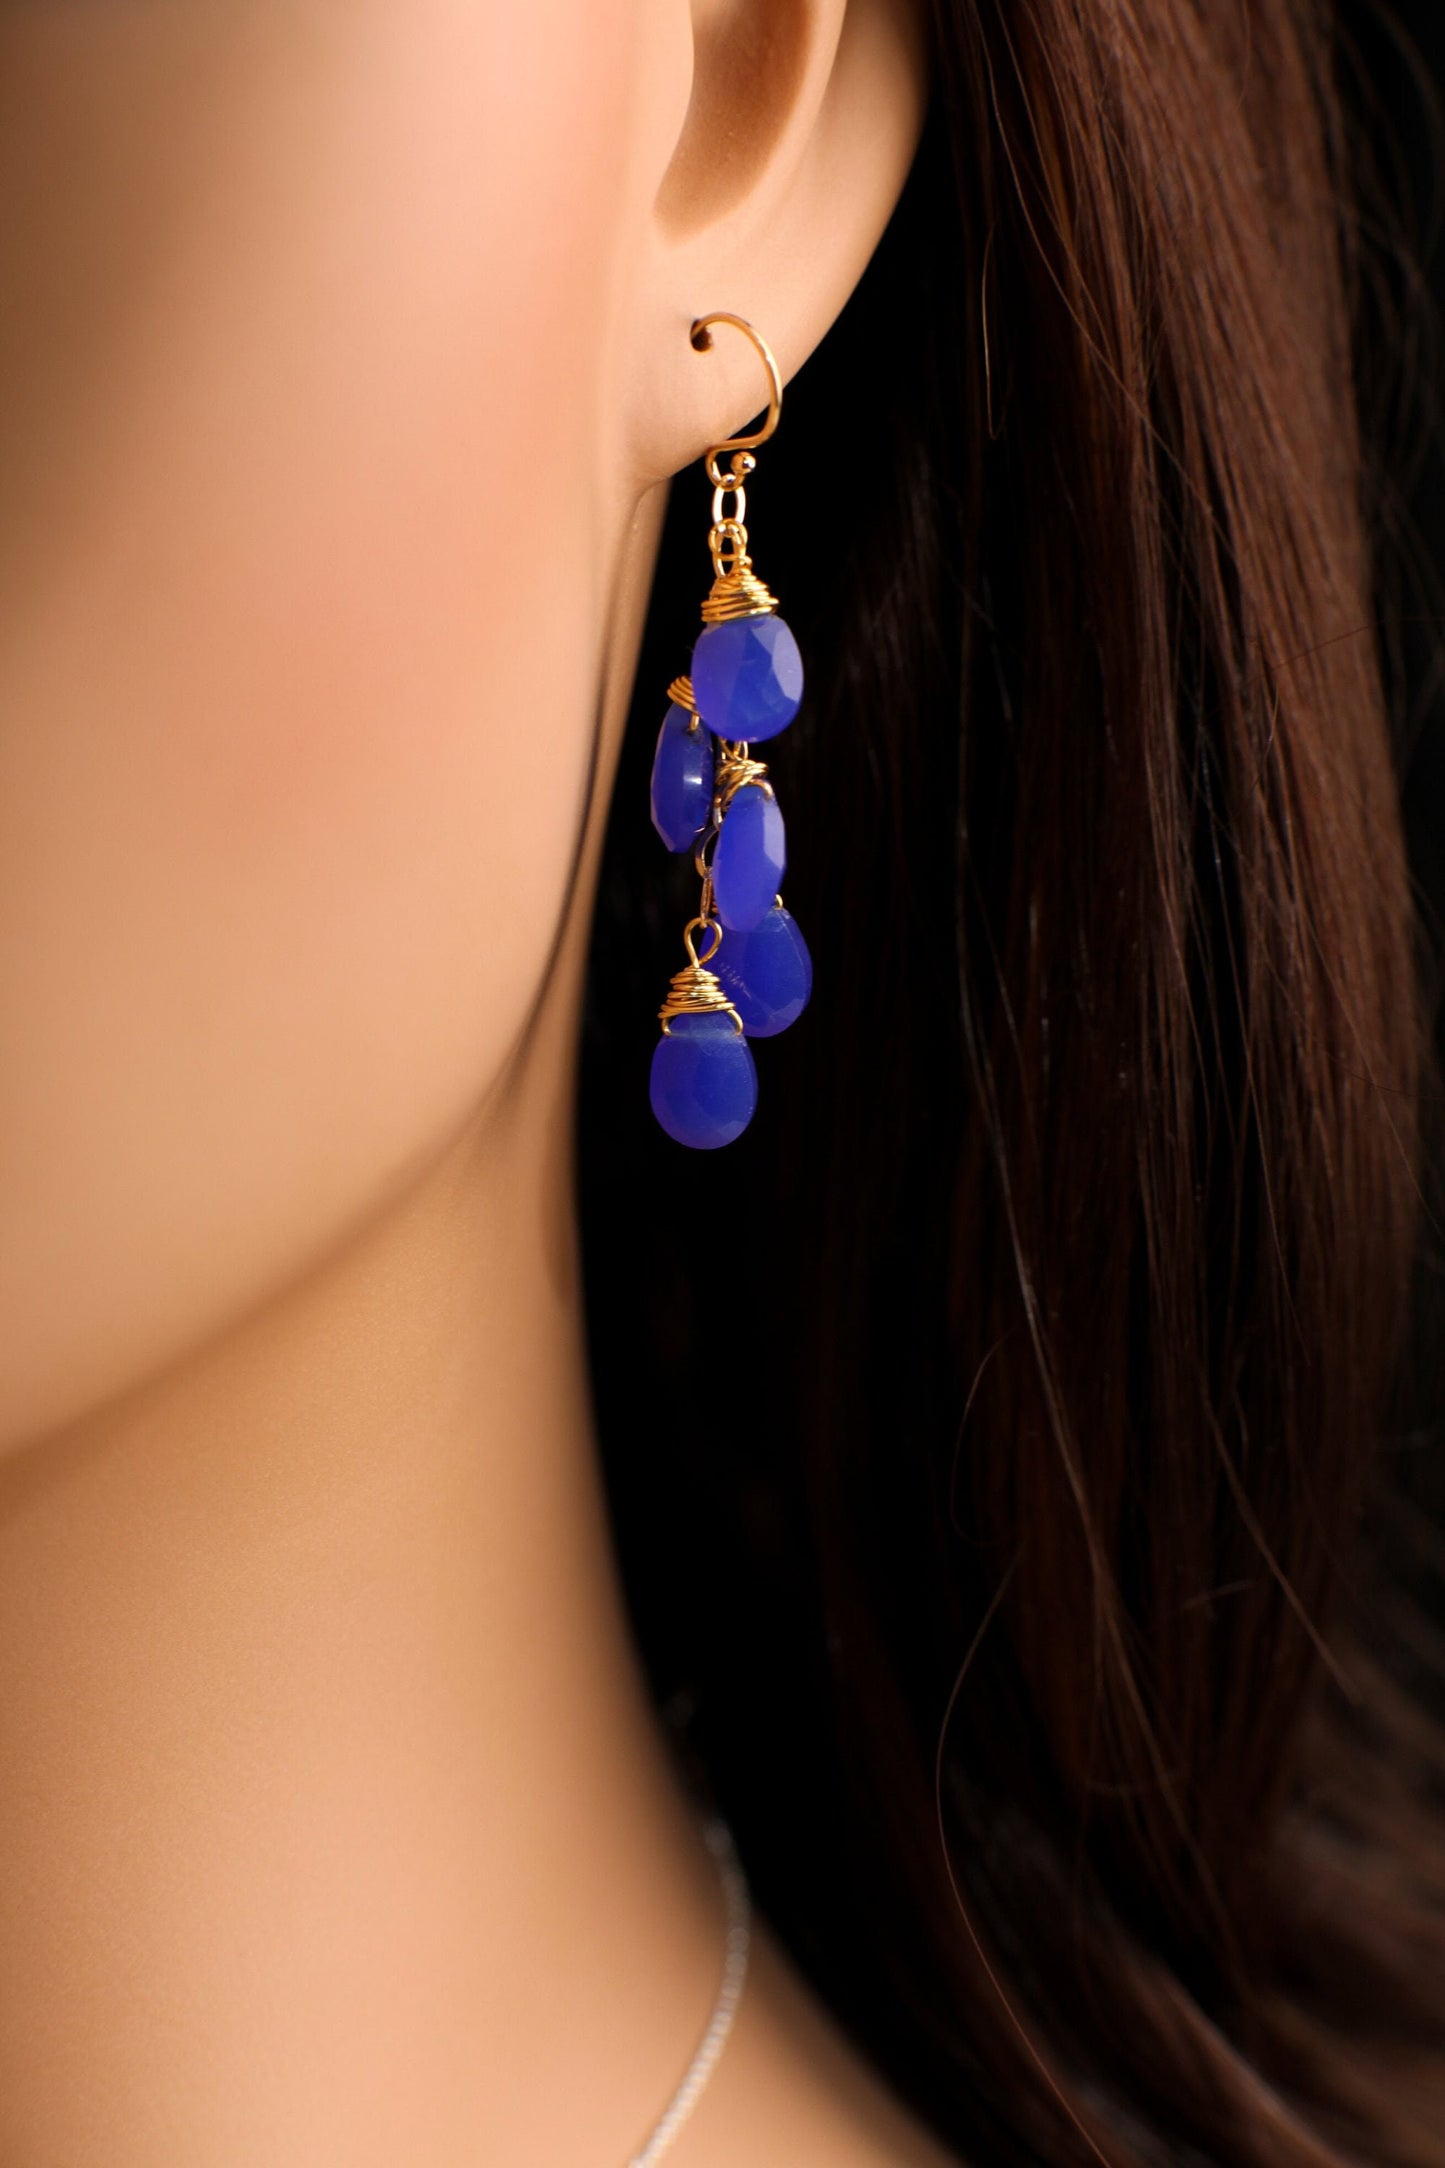 Royal Blue ,Cobalt blue Chalcedony Faceted 7x11mm pear Drop Cascade Dangling Wire Wrap earrings,14k Gold Filled or 925 sterling silver